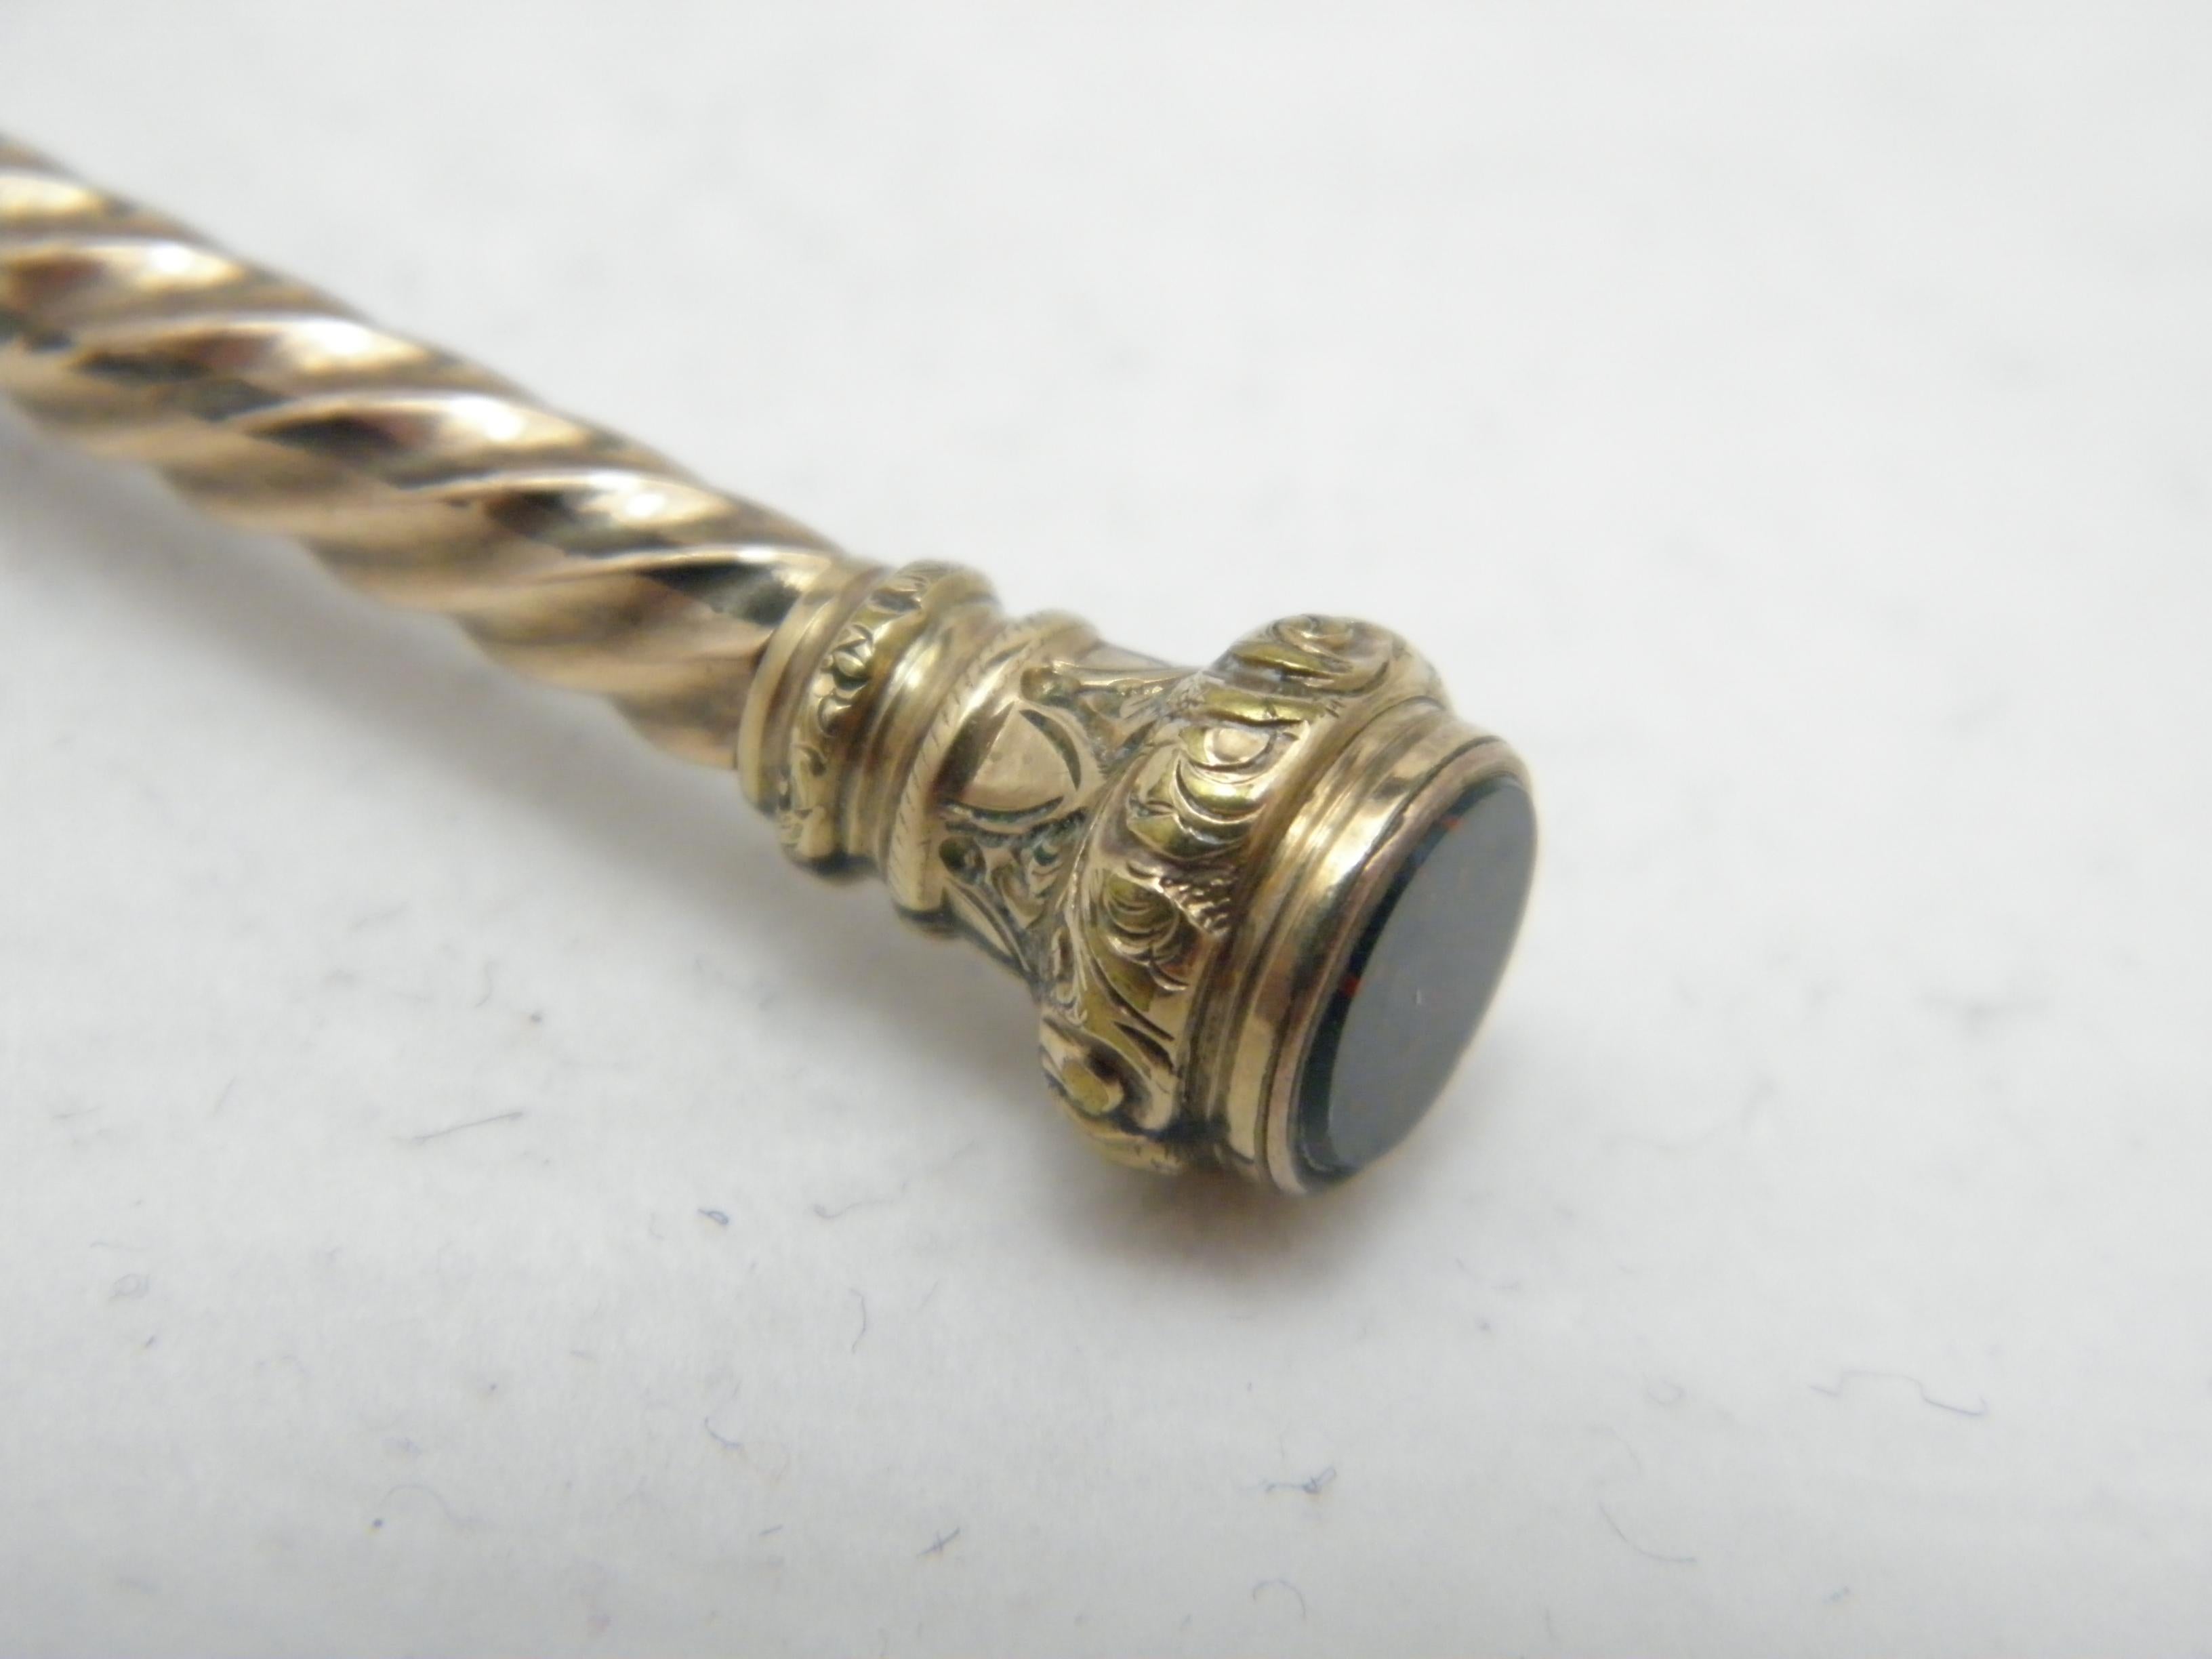 Antique 9ct Rose Gold Propelling Pencil c1850 375 Purity Large Heavy 7.5g In Good Condition For Sale In Camelford, GB